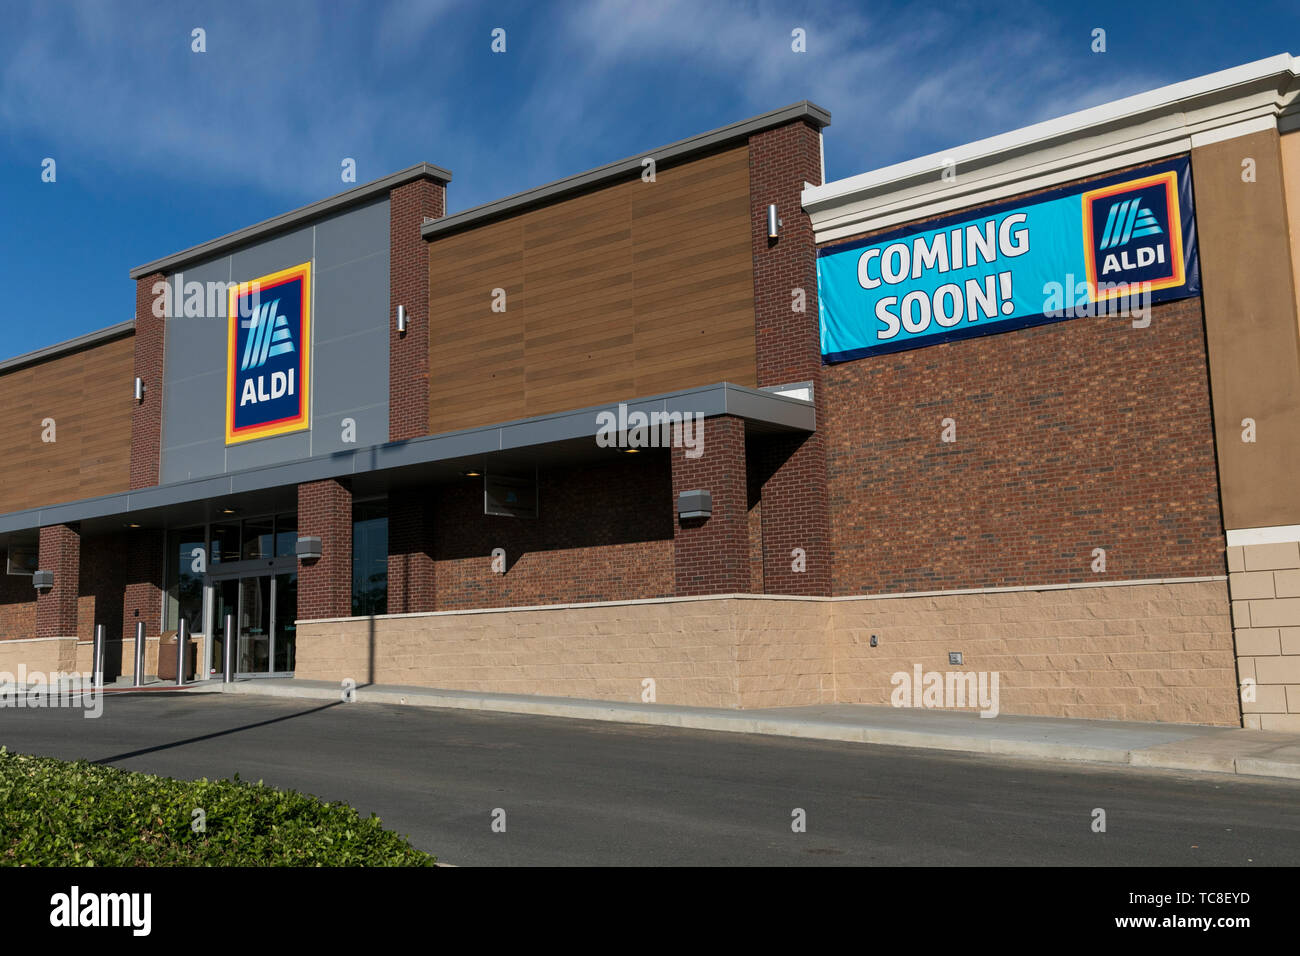 A logo sign outside of a Aldi retail grocery store location with a 'Coming Soon' banner in Martinsburg, West Virginia on June 4, 2019. Stock Photo